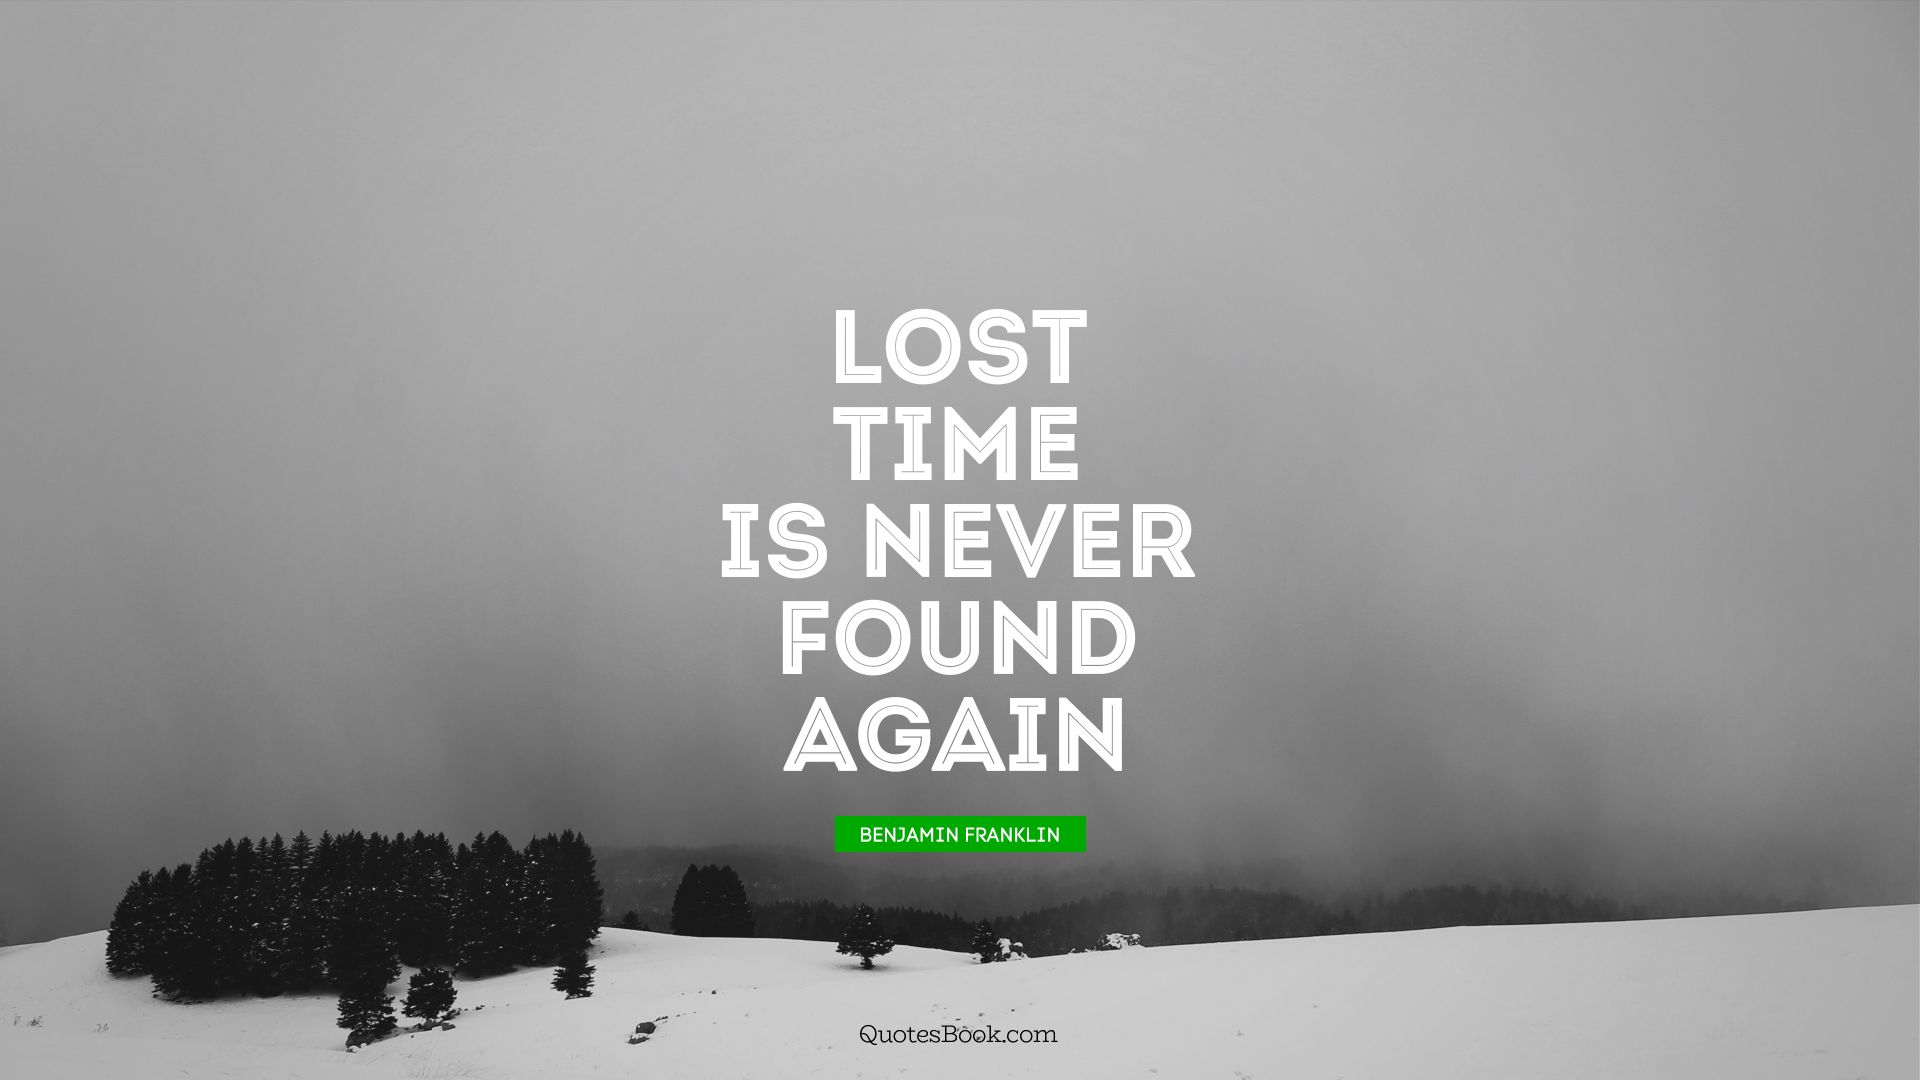 Lost time is never found again. - Quote by Benjamin Franklin